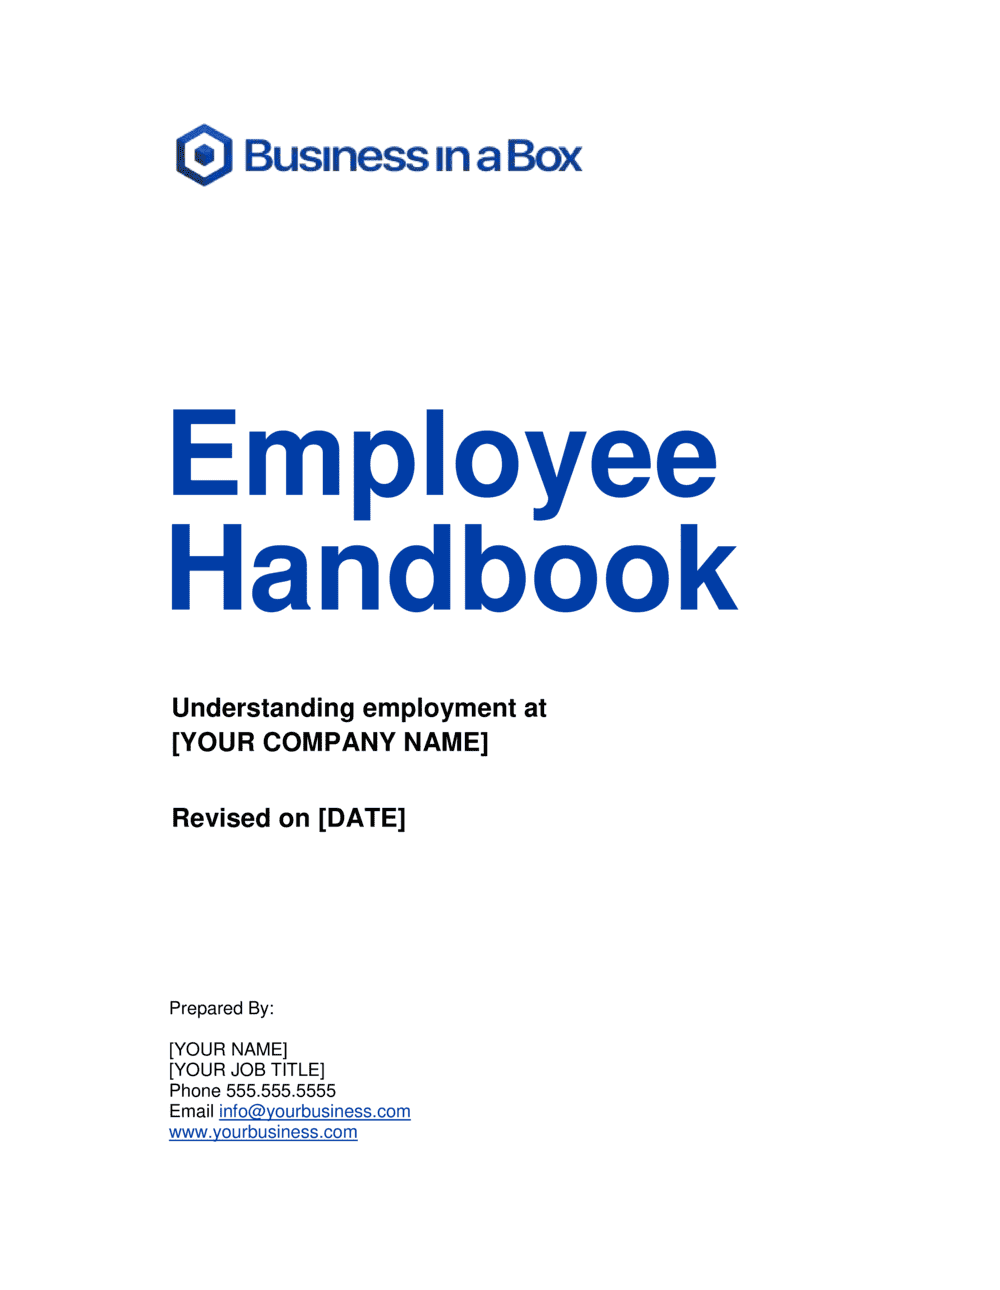 Employee Handbook Template Word from templates.business-in-a-box.com